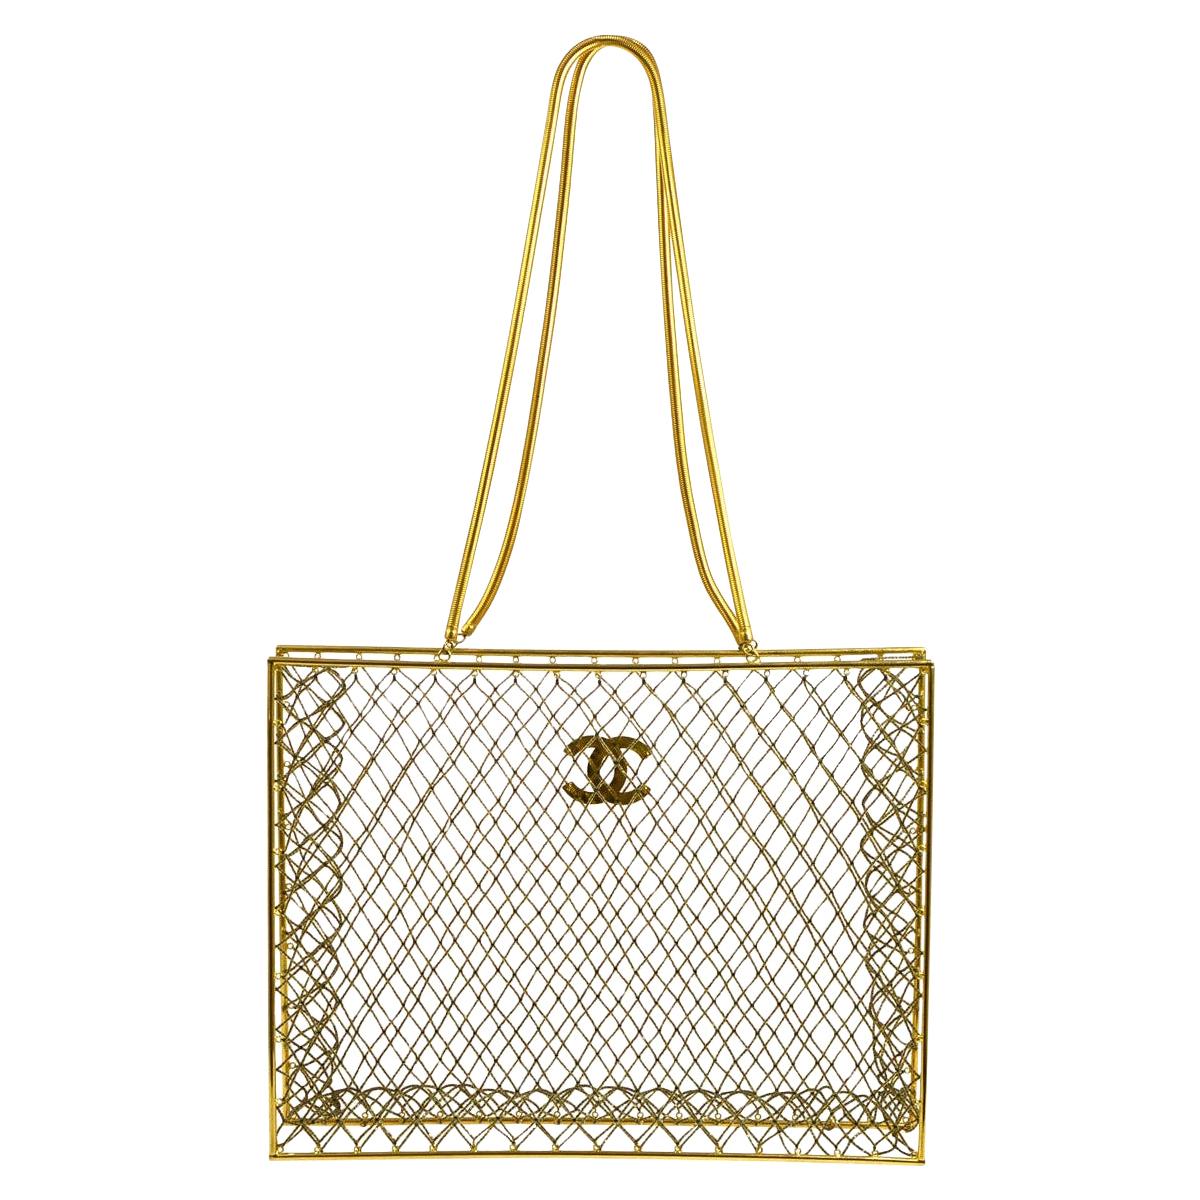 Chanel Gold Metal Beaded See Through Carryall Travel Shoulder Tote Bag in Box